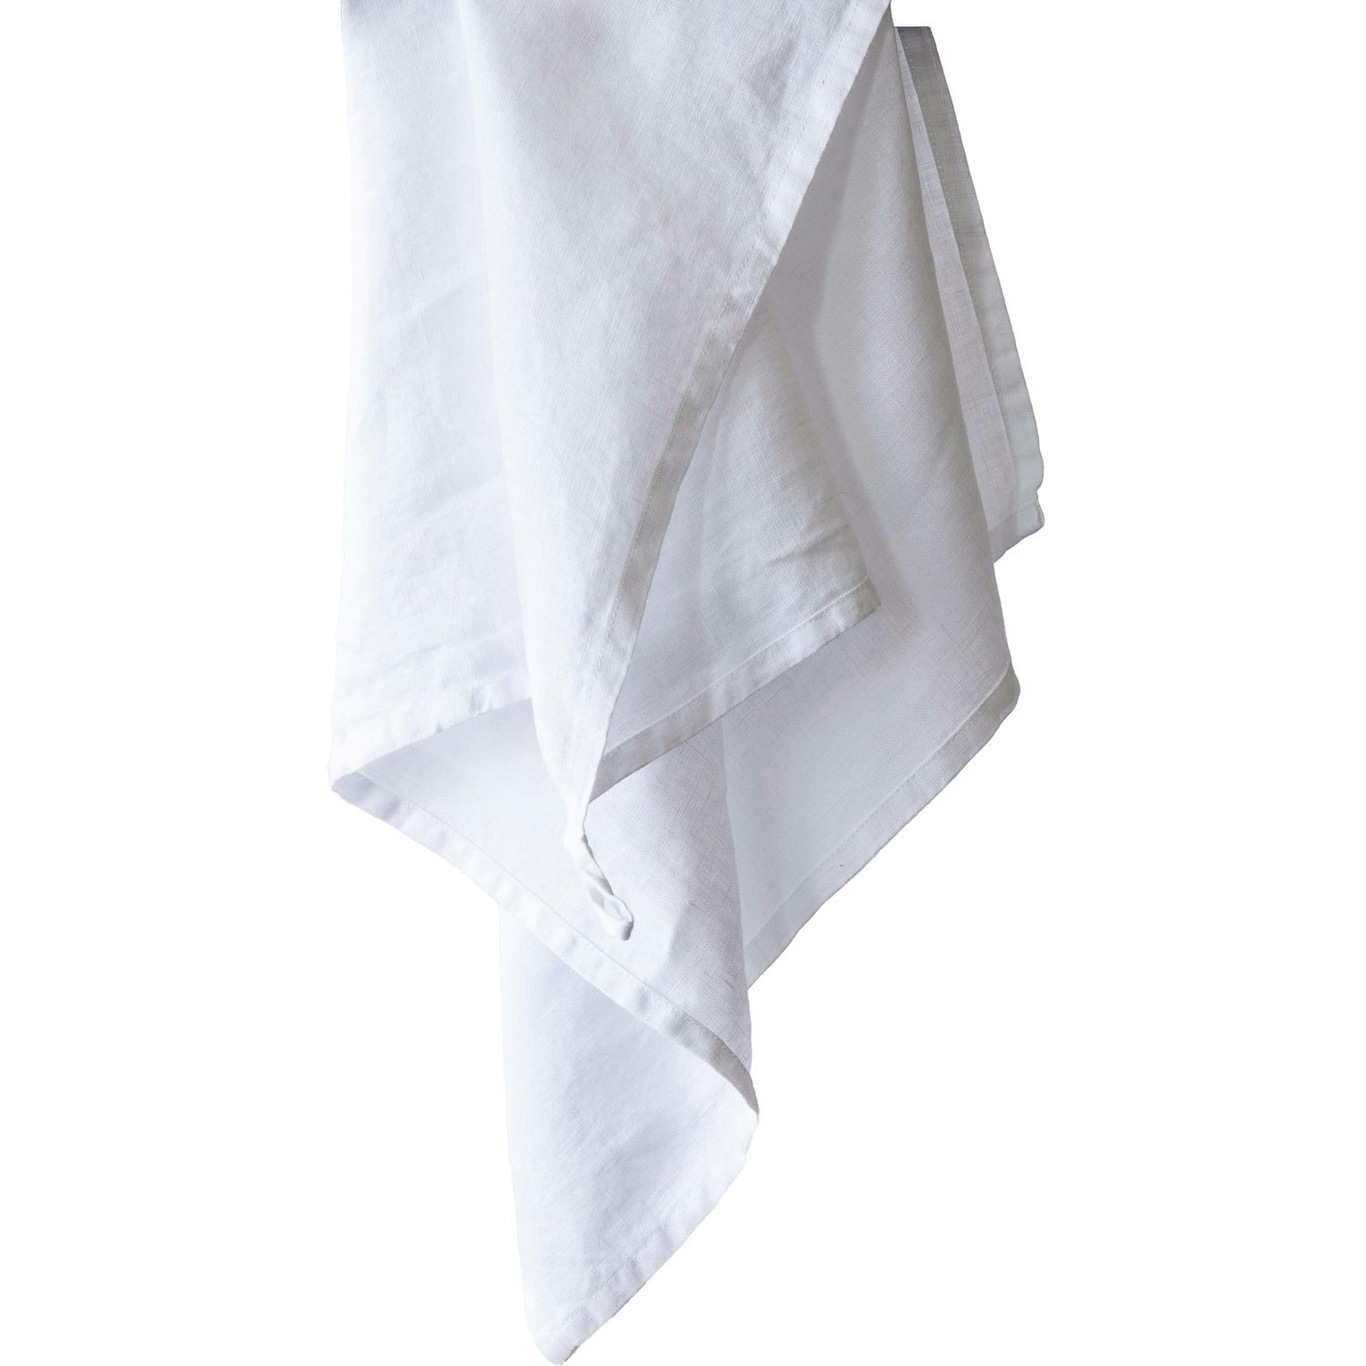 https://royaldesign.com/image/2/tell-me-more-kitchen-towel-linen-bleached-white-0?w=800&quality=80